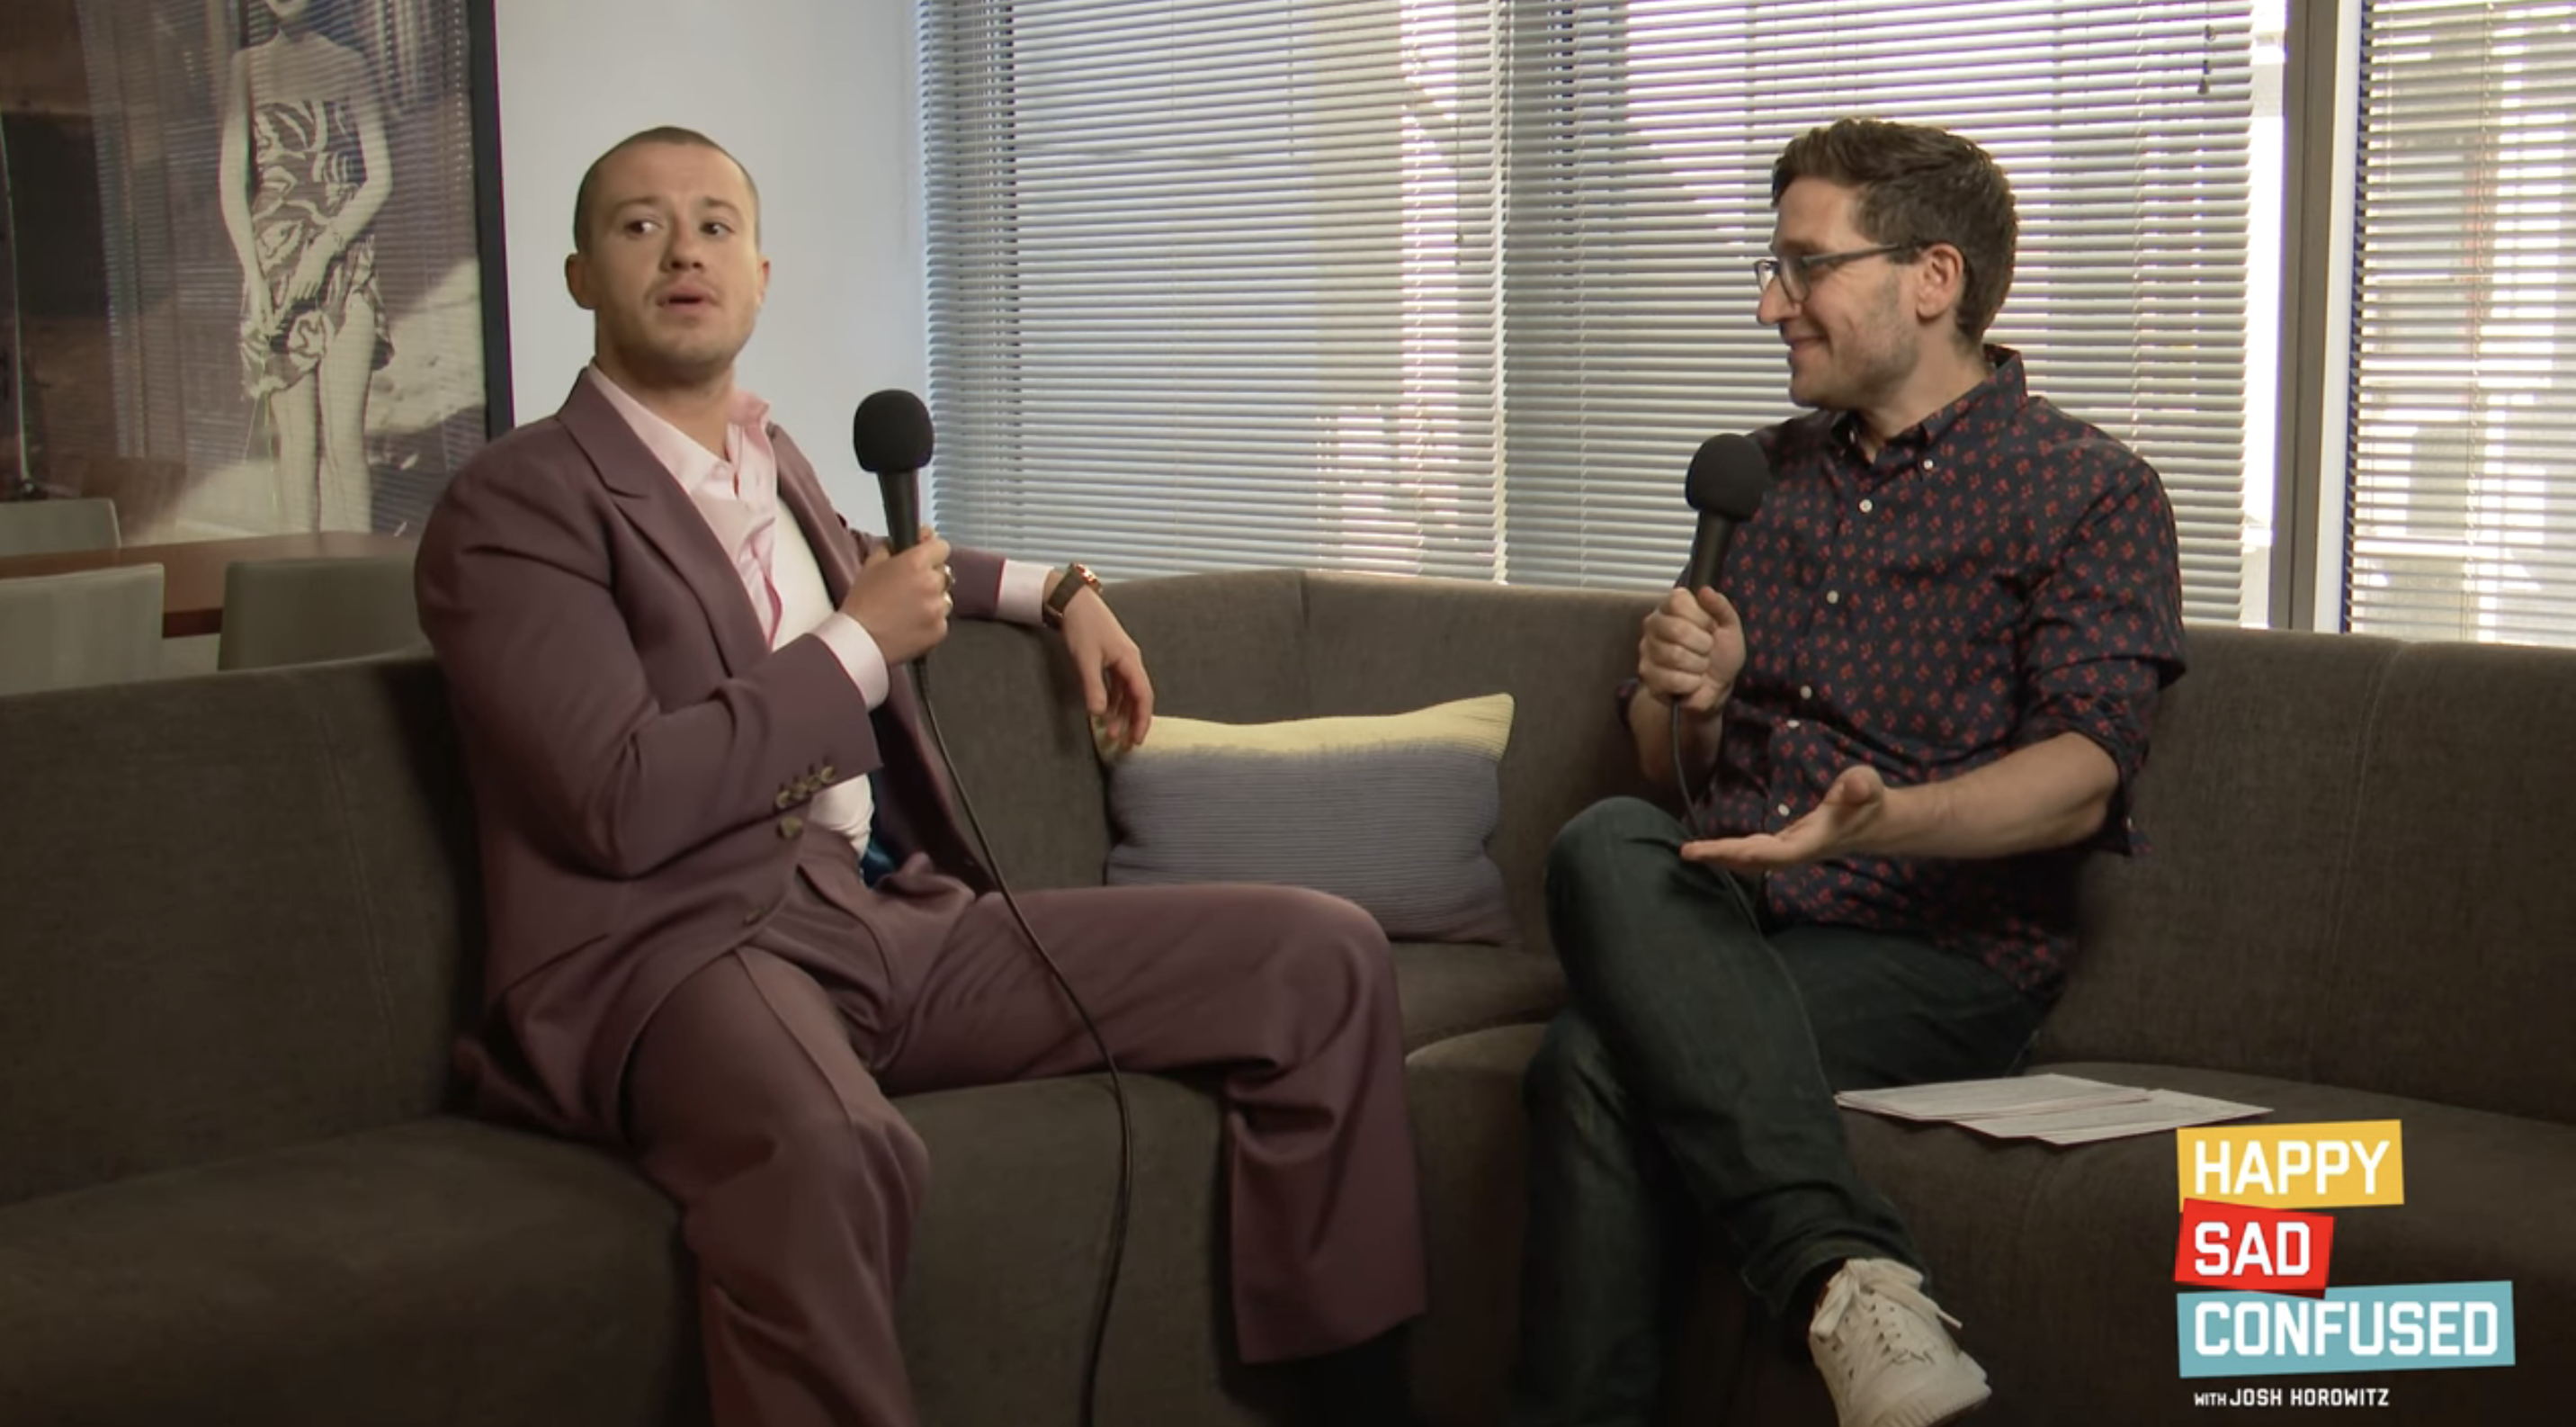 Josh Horowitz interviews Joseph Quinn on &quot;Happy Sad Confused.&quot; Both are sitting on a couch in an office setting